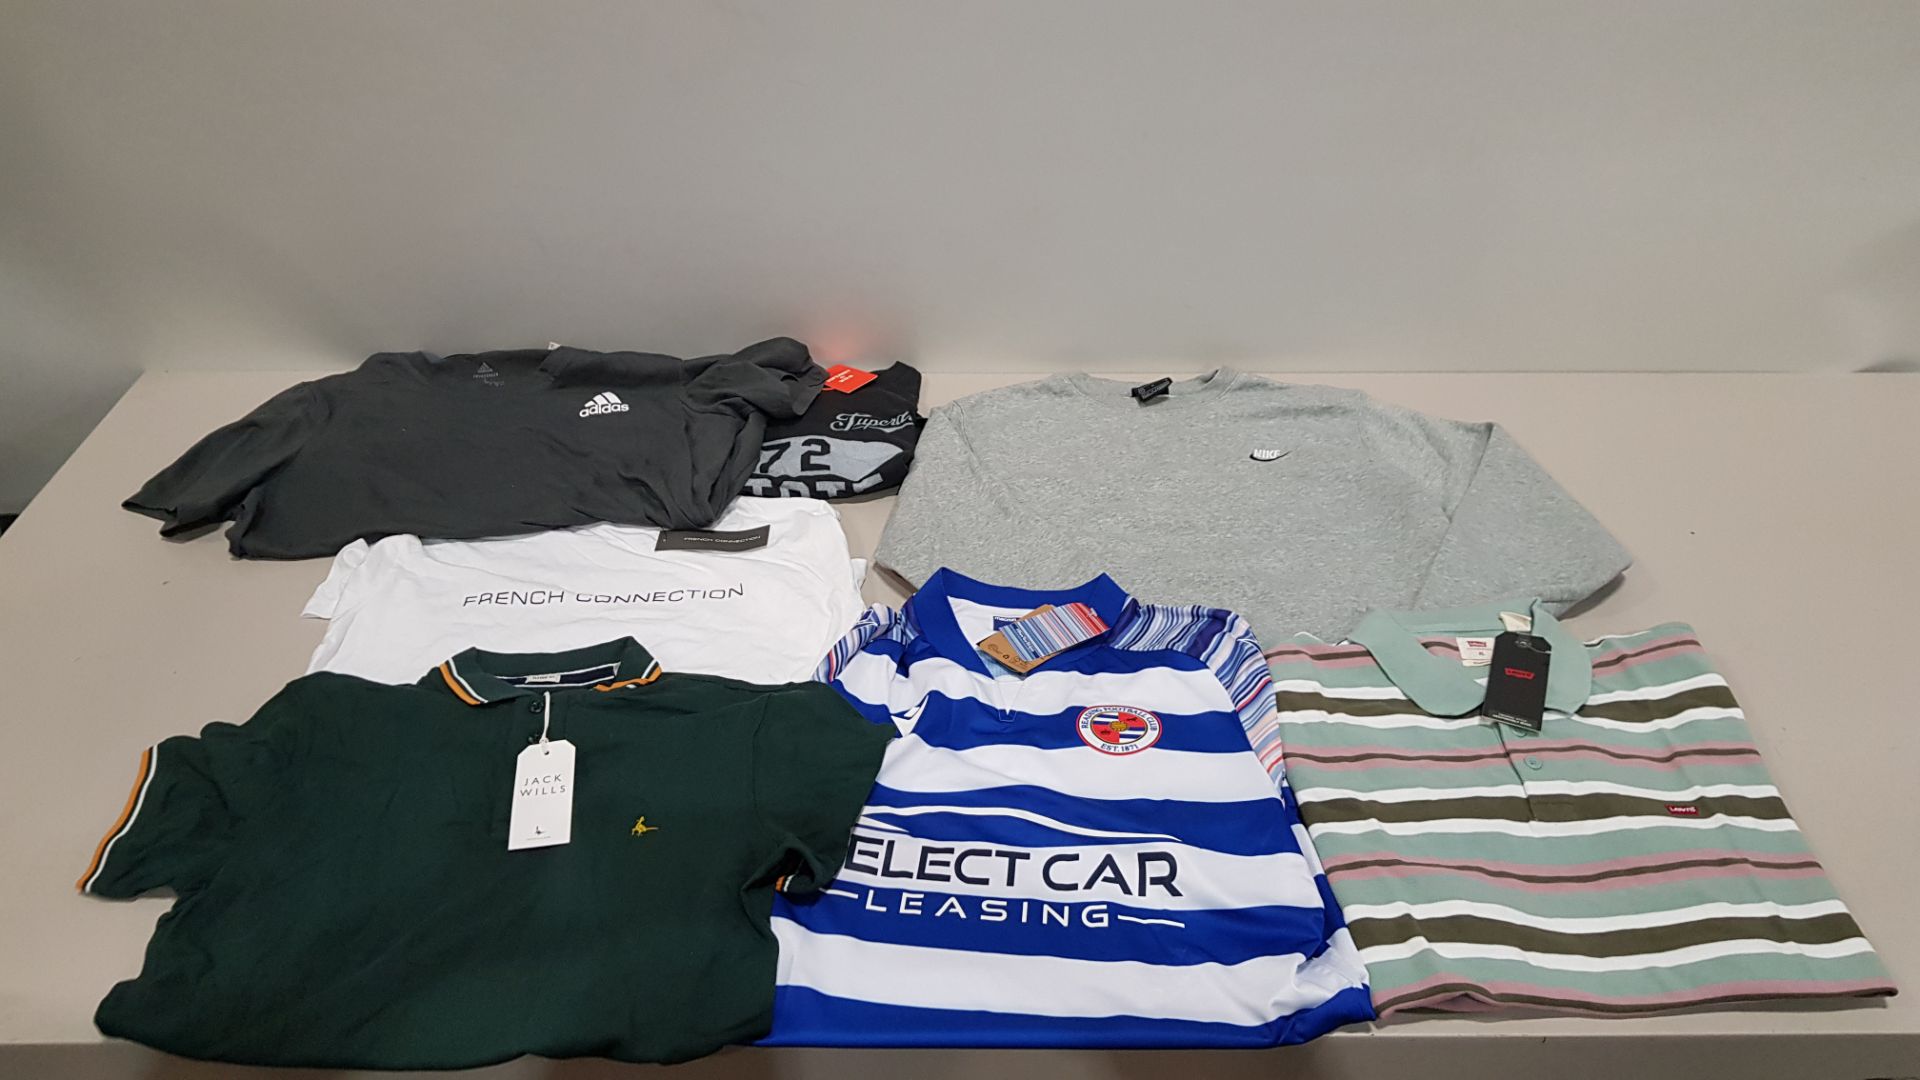 25 PIECE BRAND NEW CLOTHING LOT CONTAINING LEVIS POLO SHIRT , READING FOOTBALL CLUB JERSEY ,